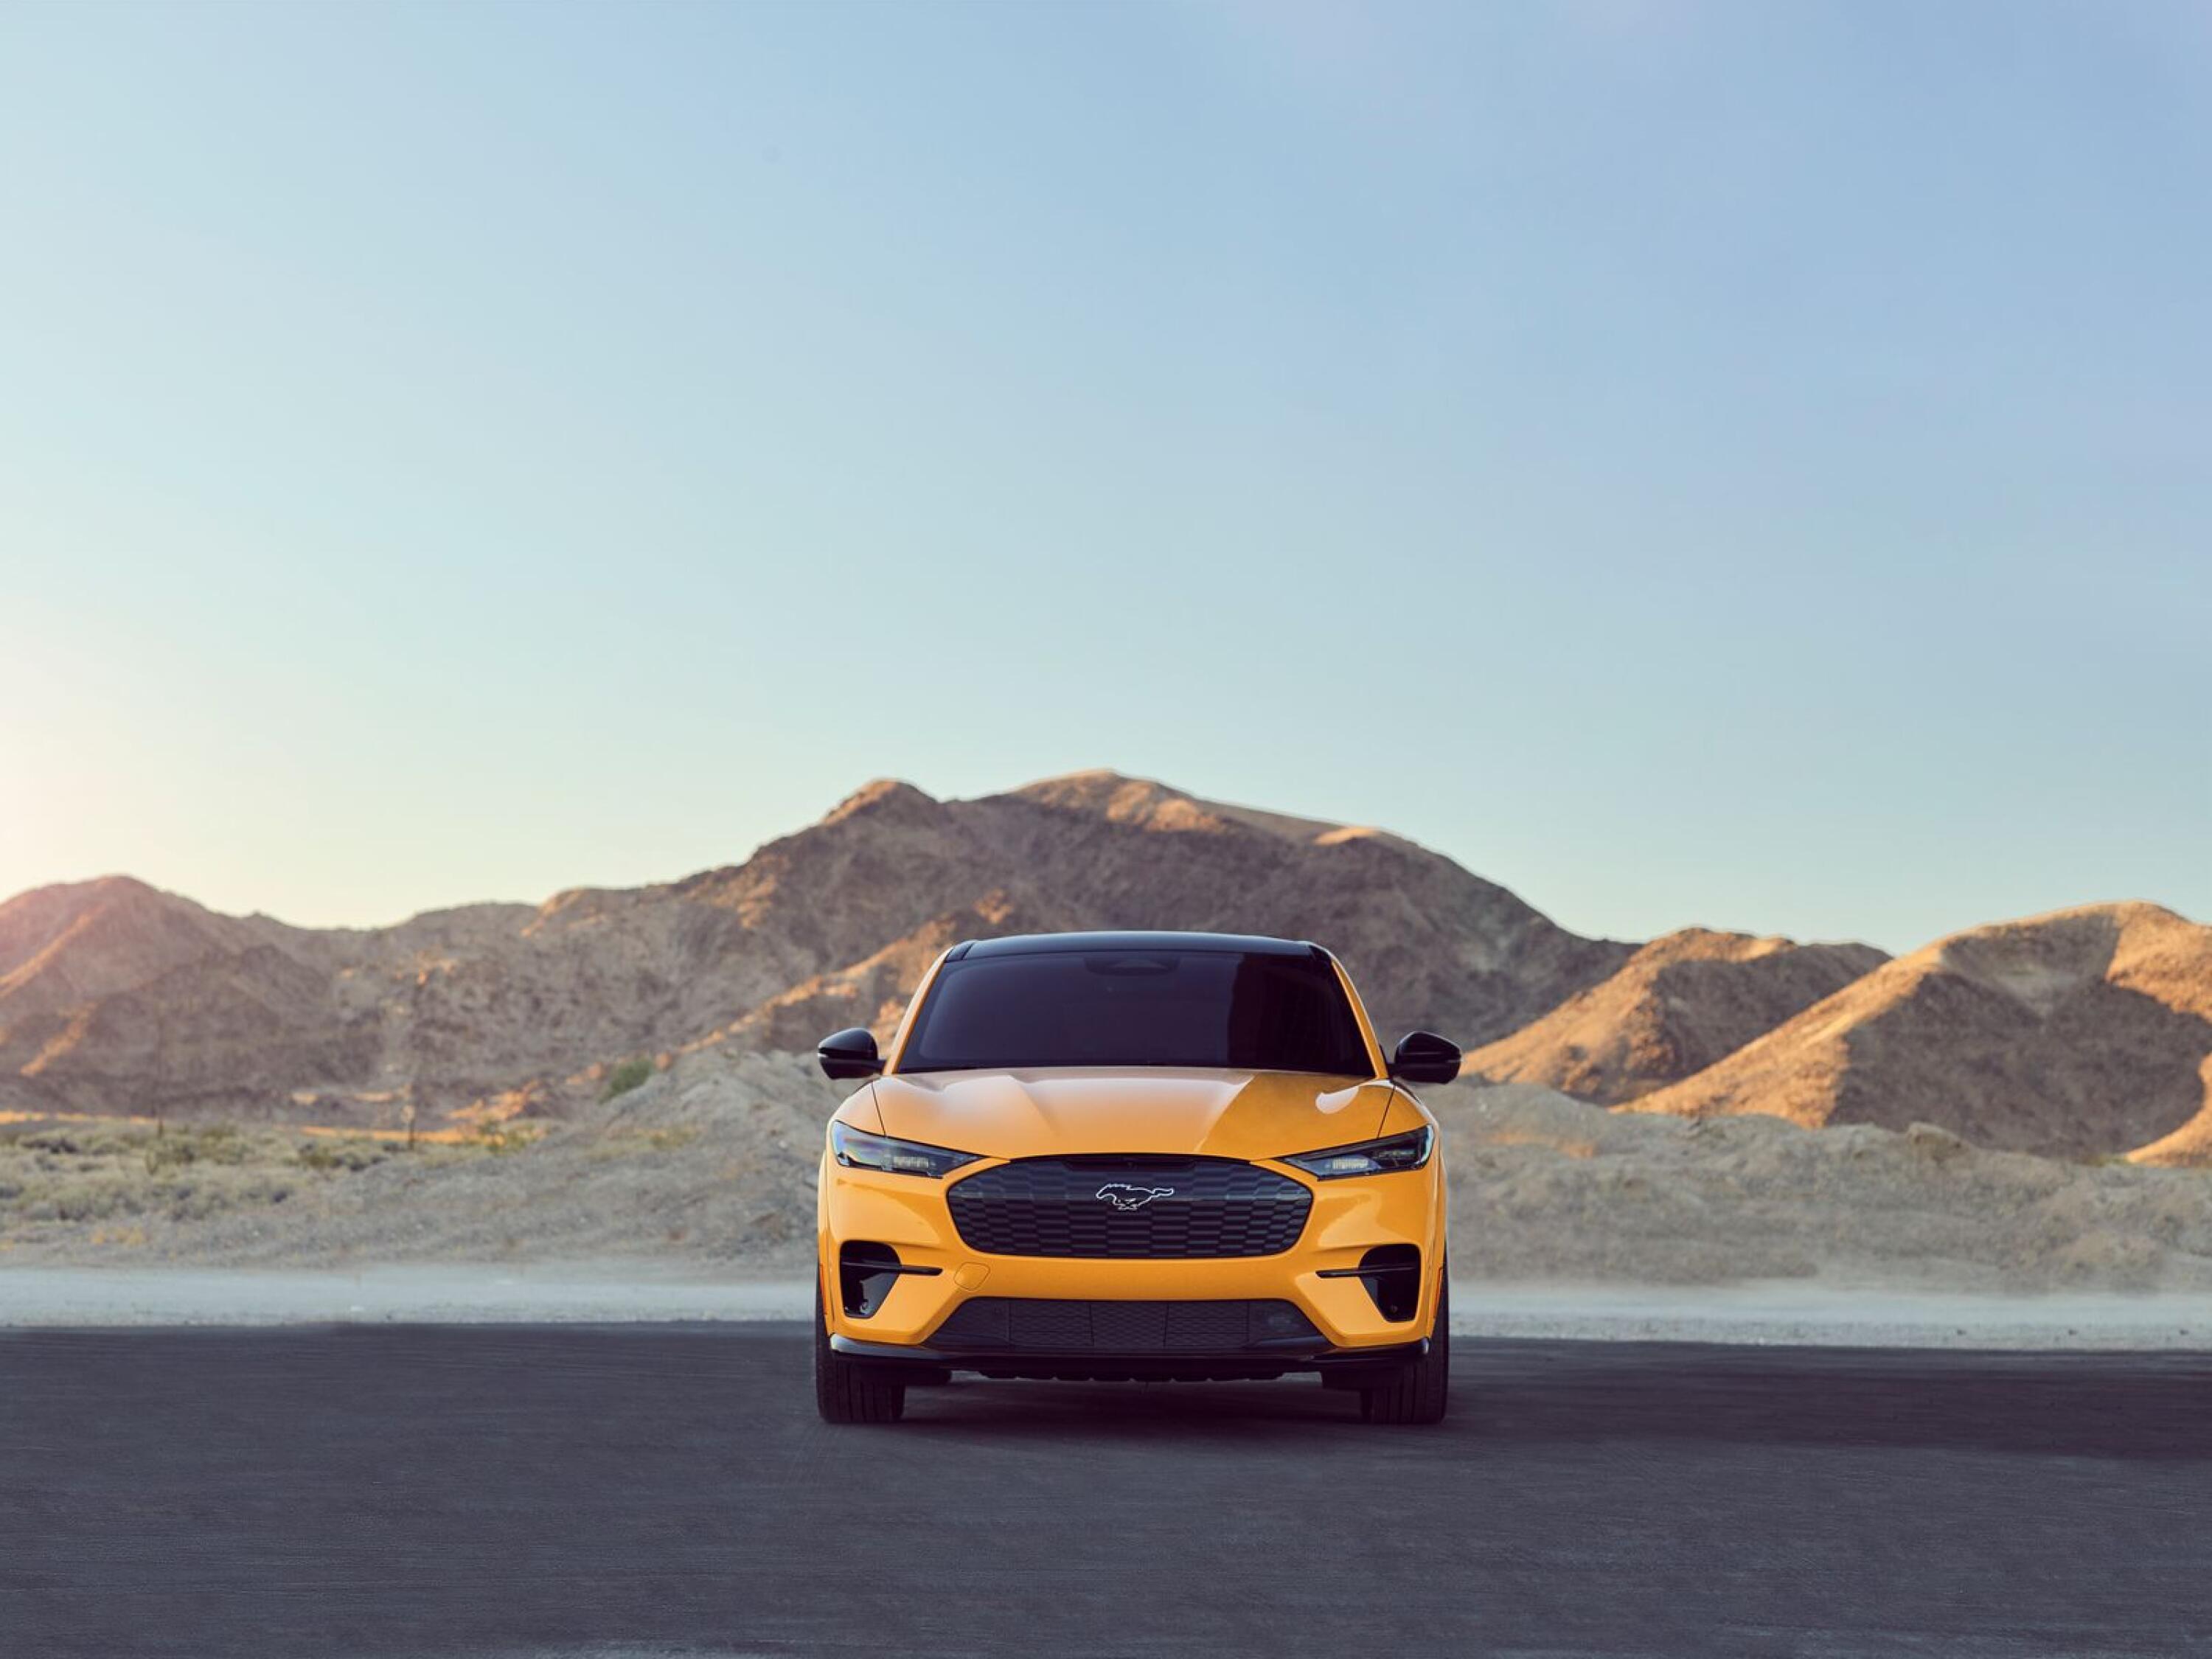 Electric pony: 2021 Mustang Mach E GT is ready for customer deliveries